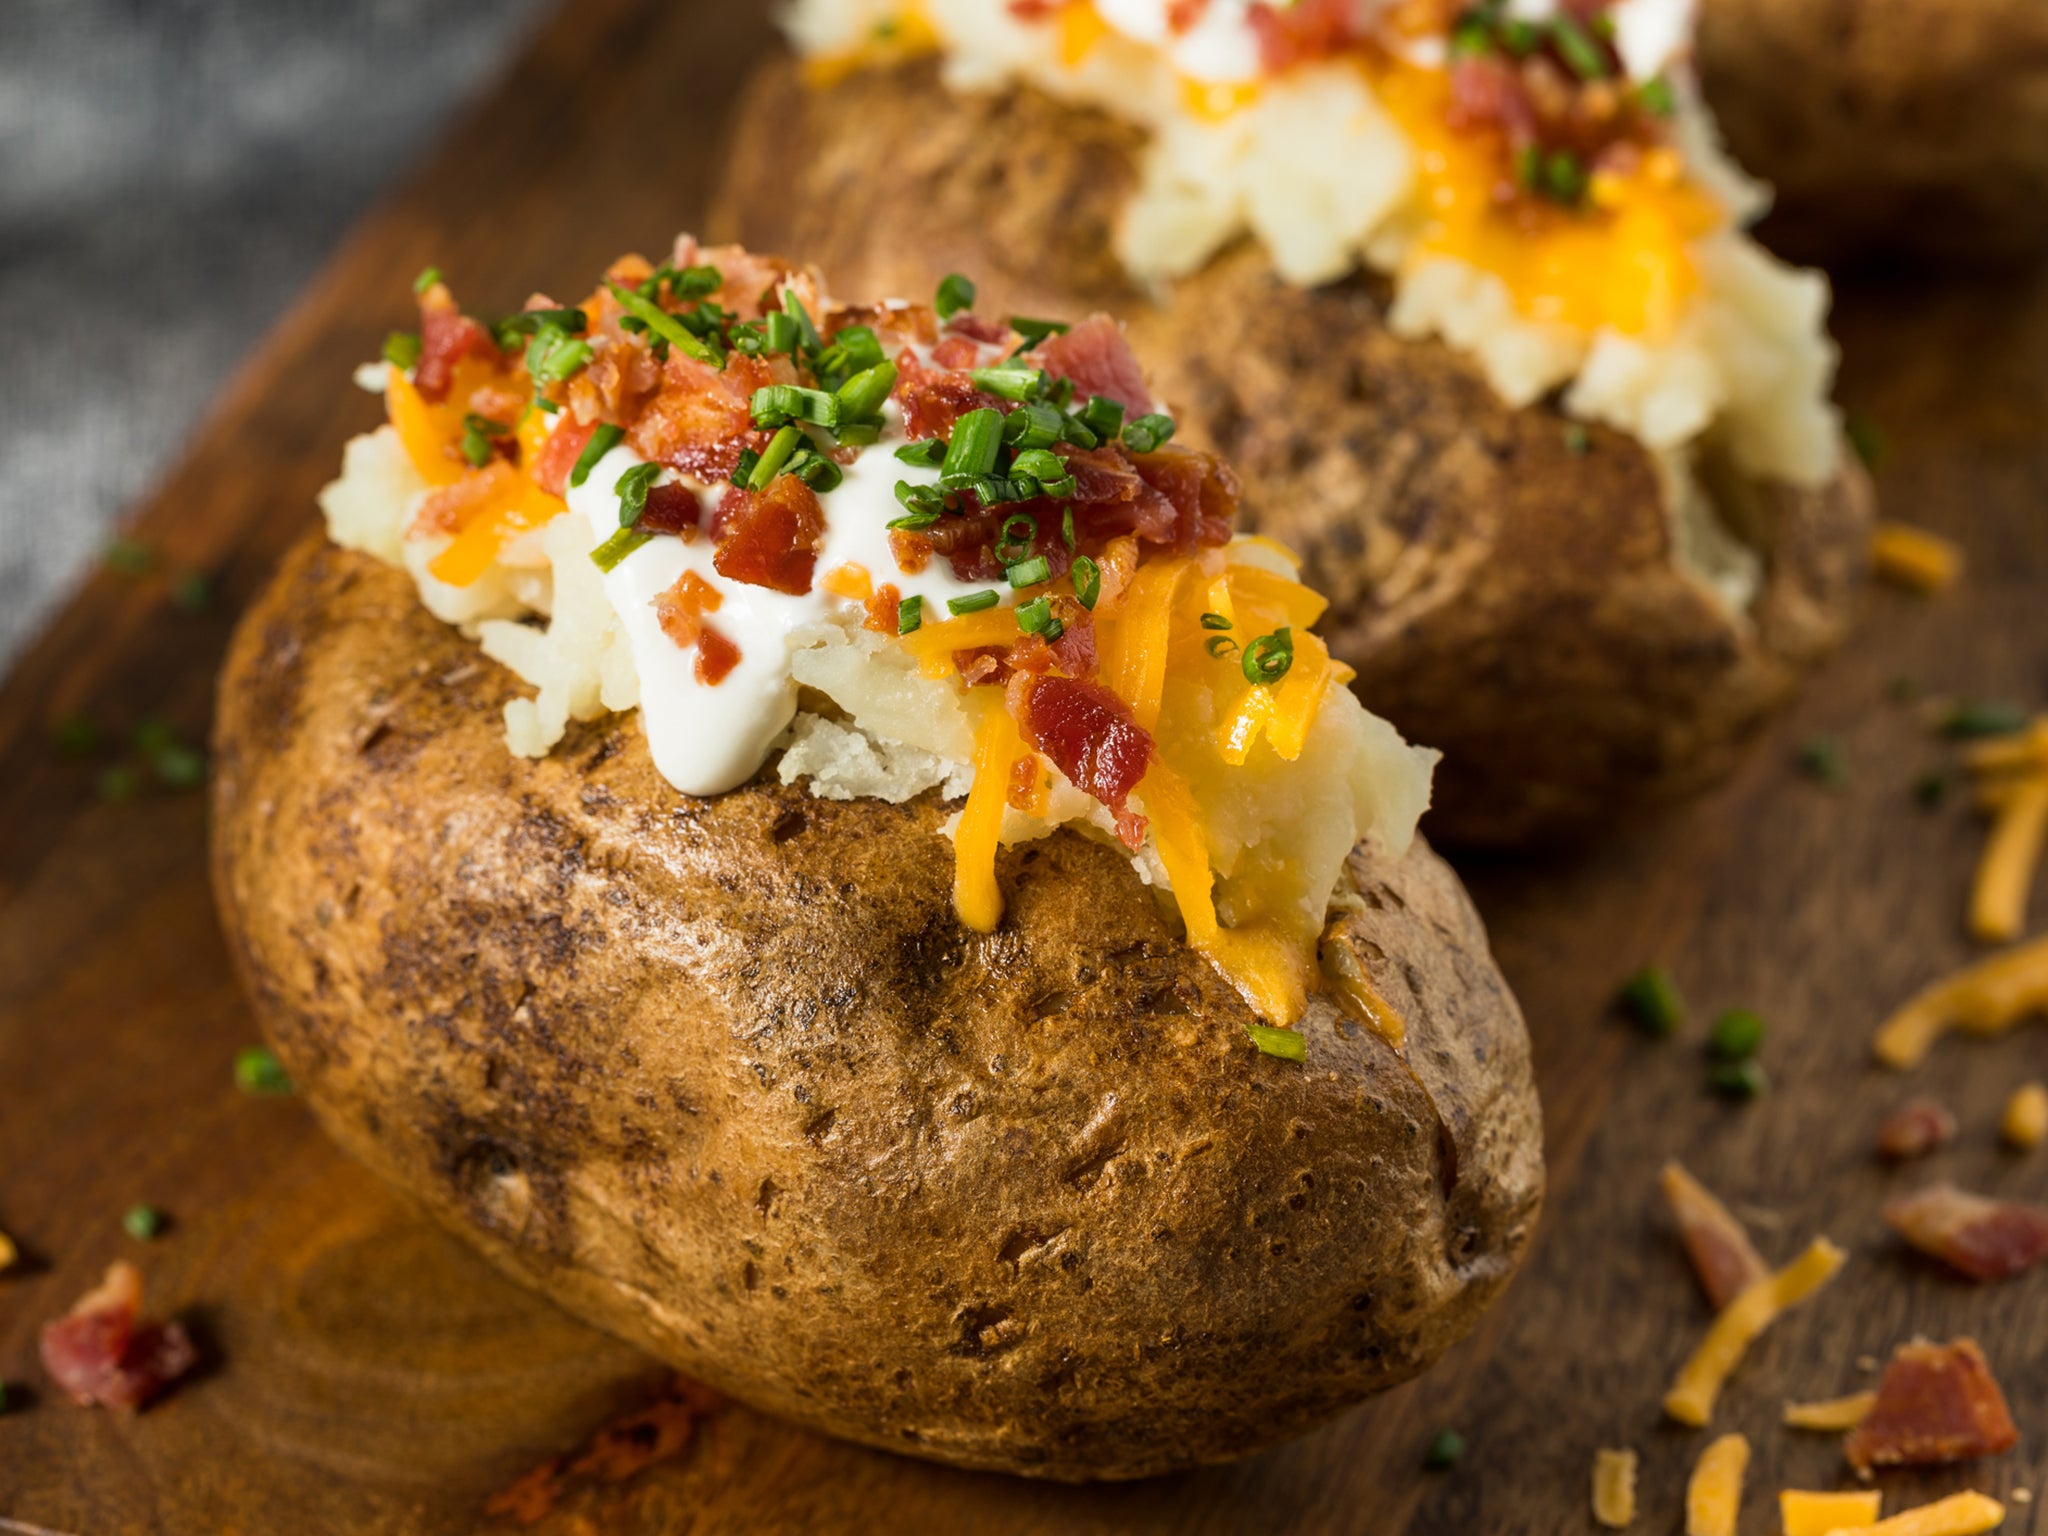 Loaded potato skins filled with cheese and bacon, made crispy in the air fryer